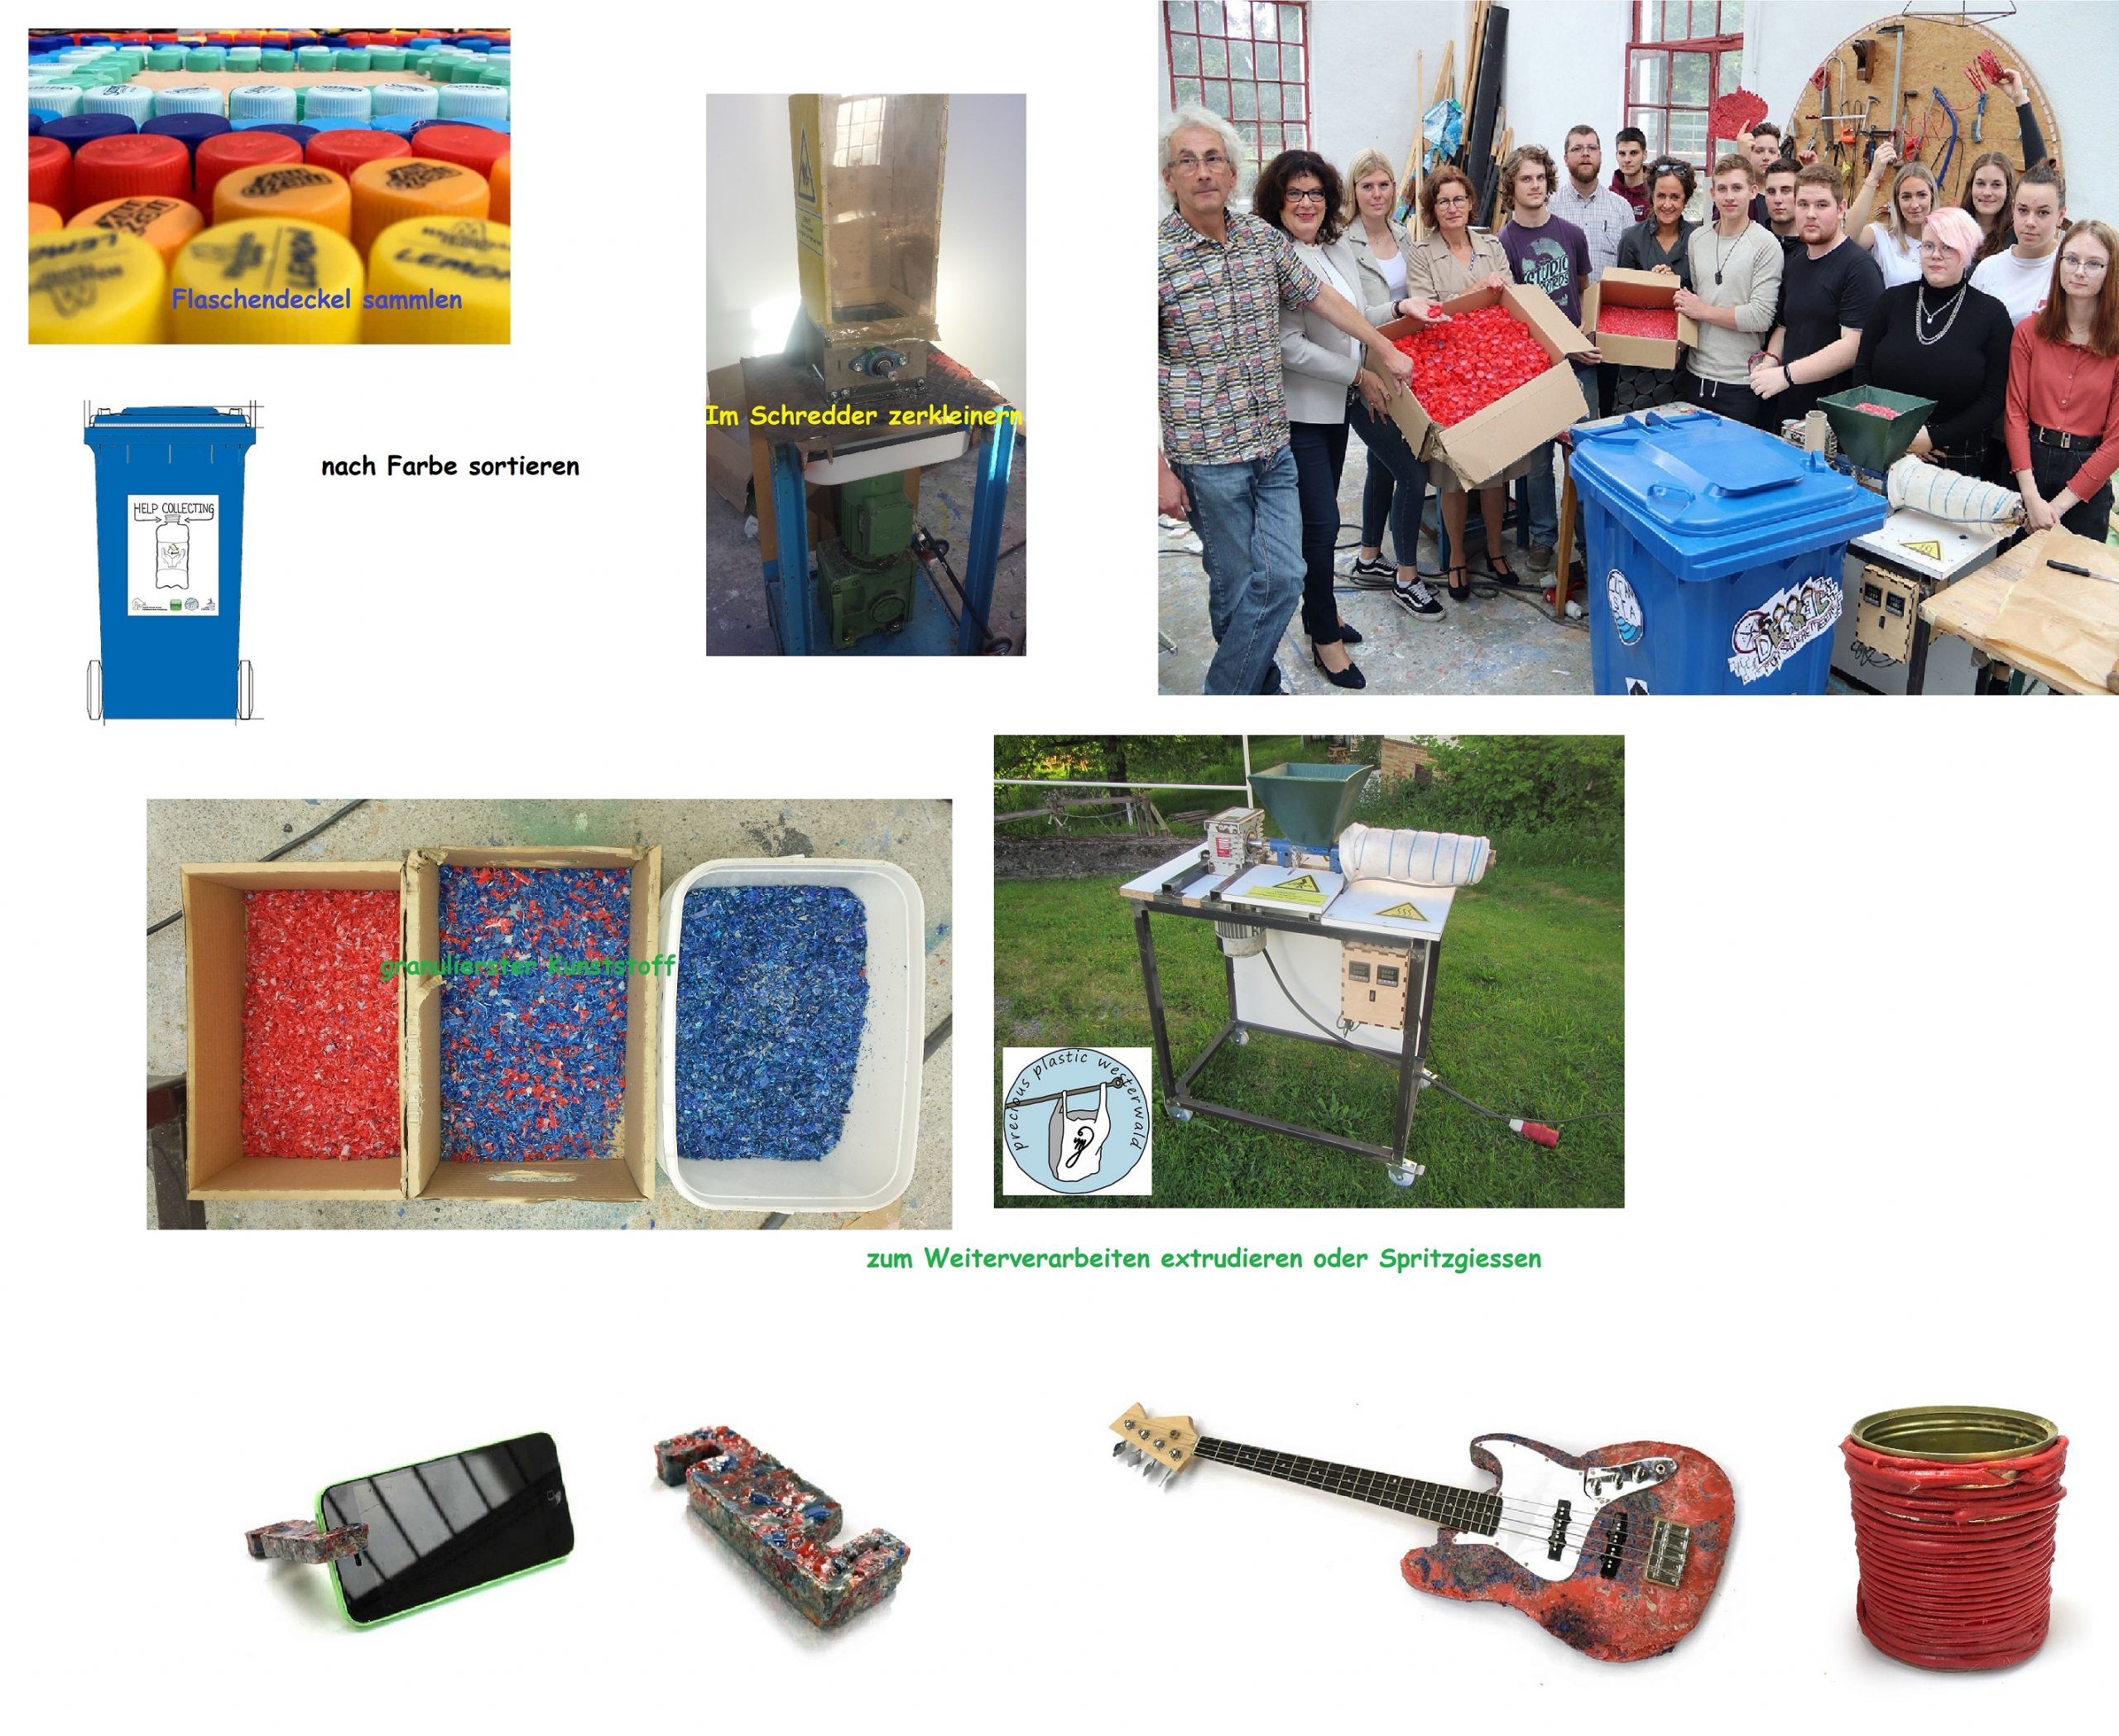 PreciousPlasticWesterWald – Recycle houshold plastic in every community - Picture